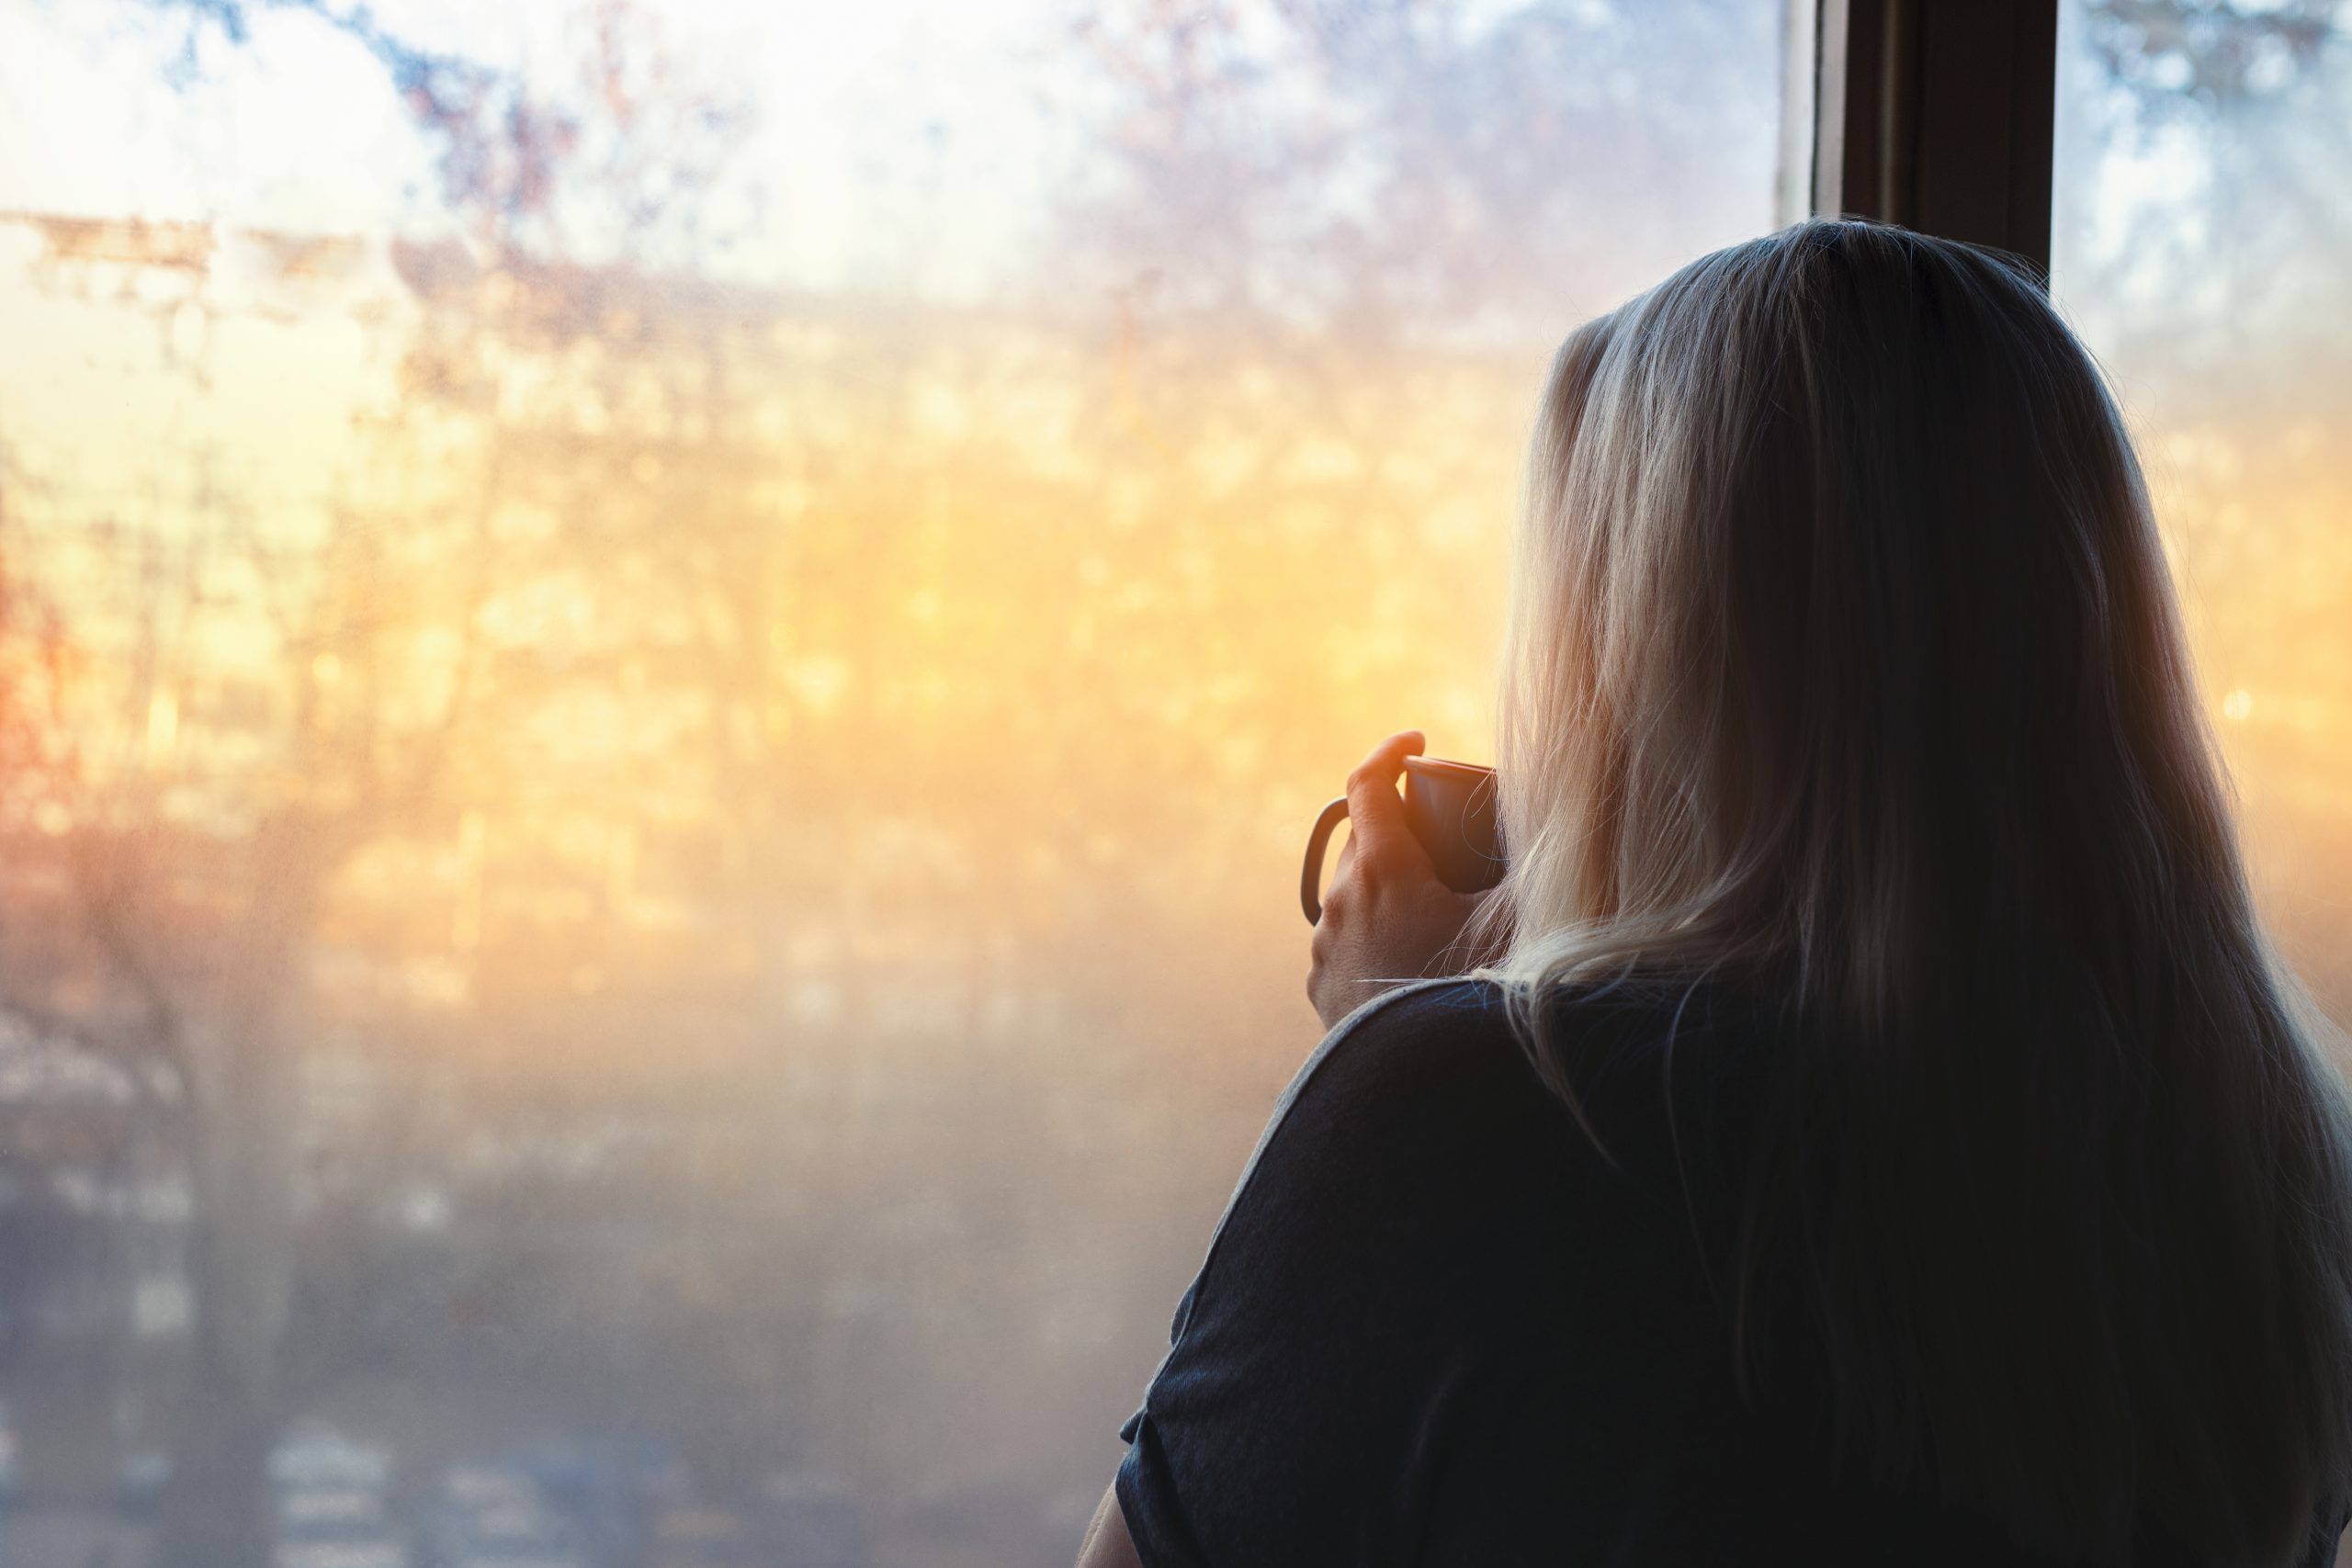 A woman with white hair looking out of a window at the sunrise. She is facing away from the camera, and holding a mug, close to her face, maybe her morning coffee.